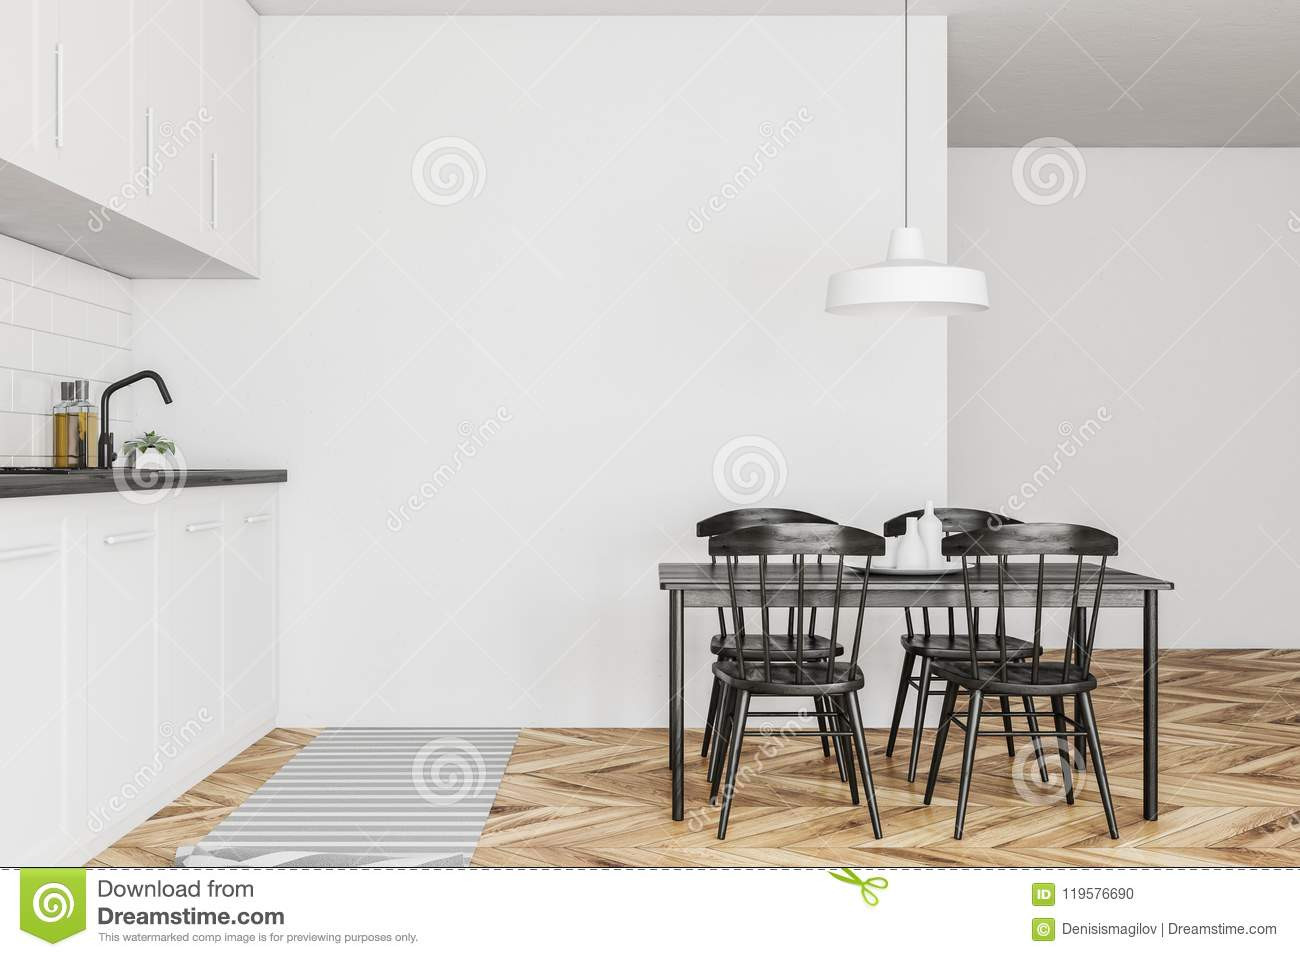 22 Wonderful Pictures Of White Kitchens with Hardwood Floors 2024 free download pictures of white kitchens with hardwood floors of white kitchen interior black table wood stock illustration with white kitchen interior black table wood